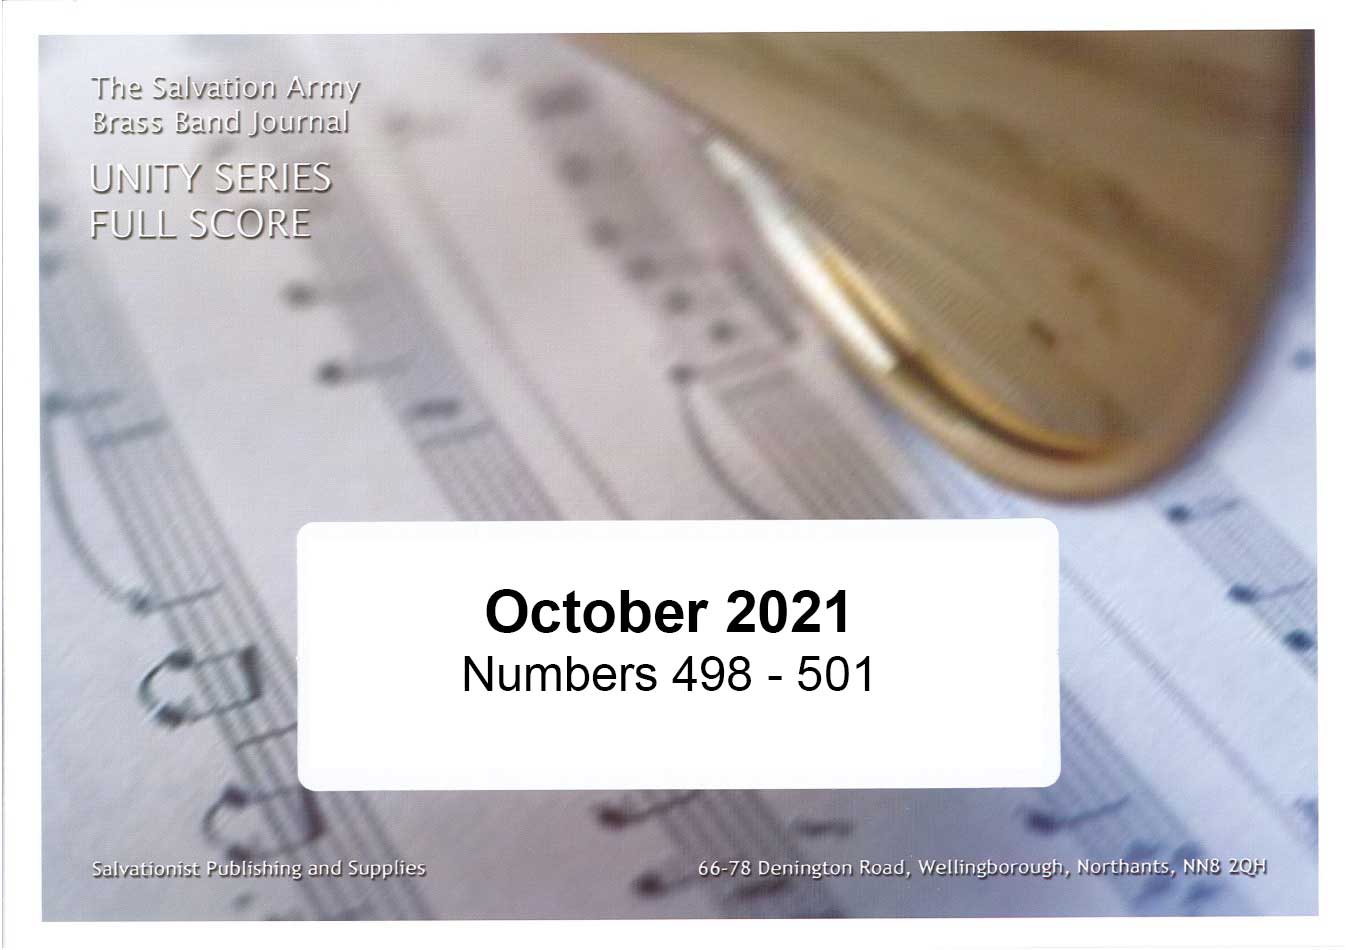 Unity Series Band Journal October 2021 - Numbers 498 - 501